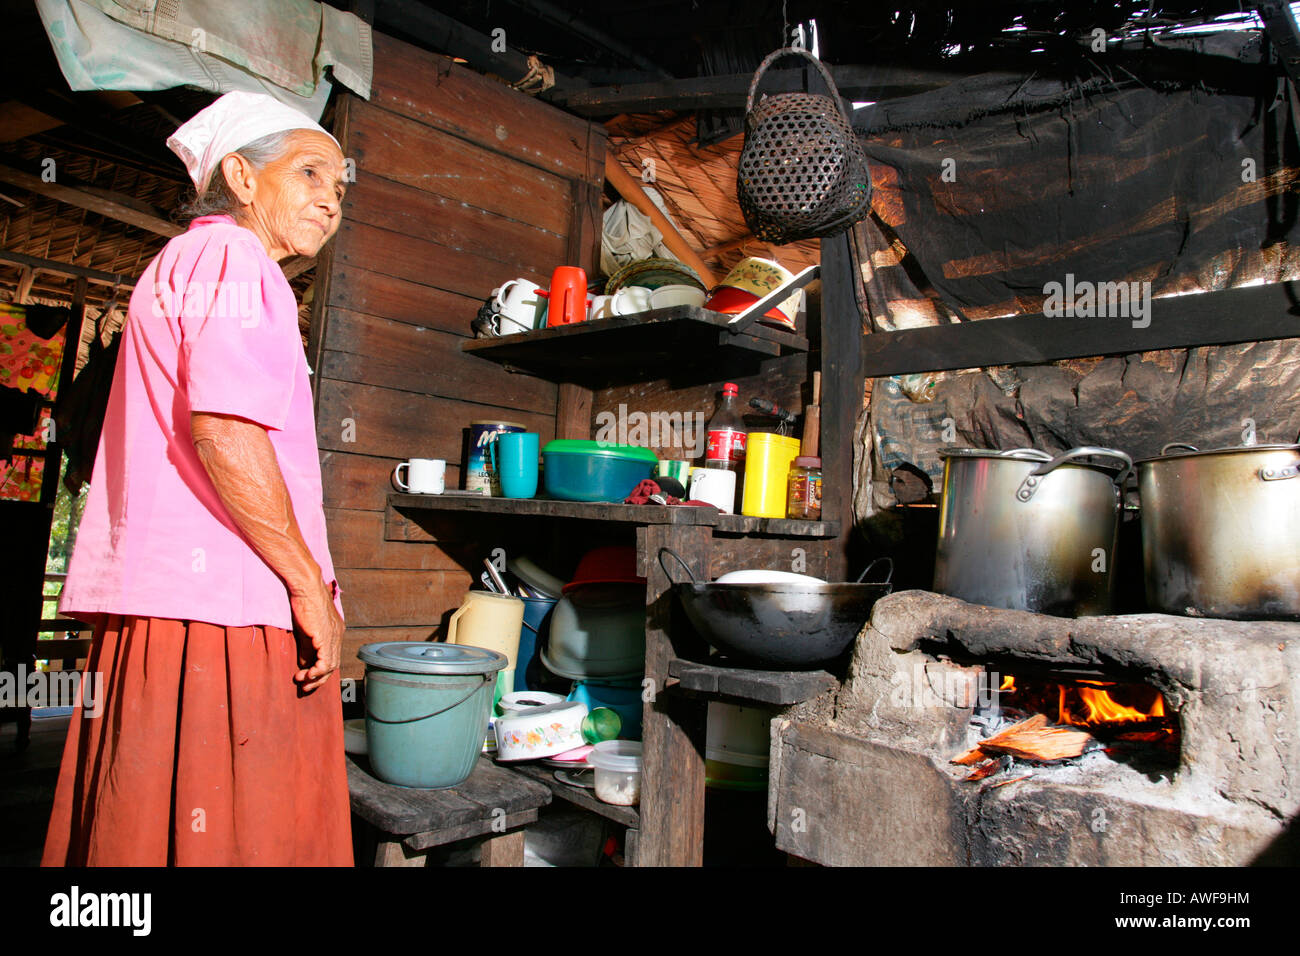 Grandmother in the kitchen, Amerindians of the Arawak tribe, Santa Mission, Guyana, South America Stock Photo